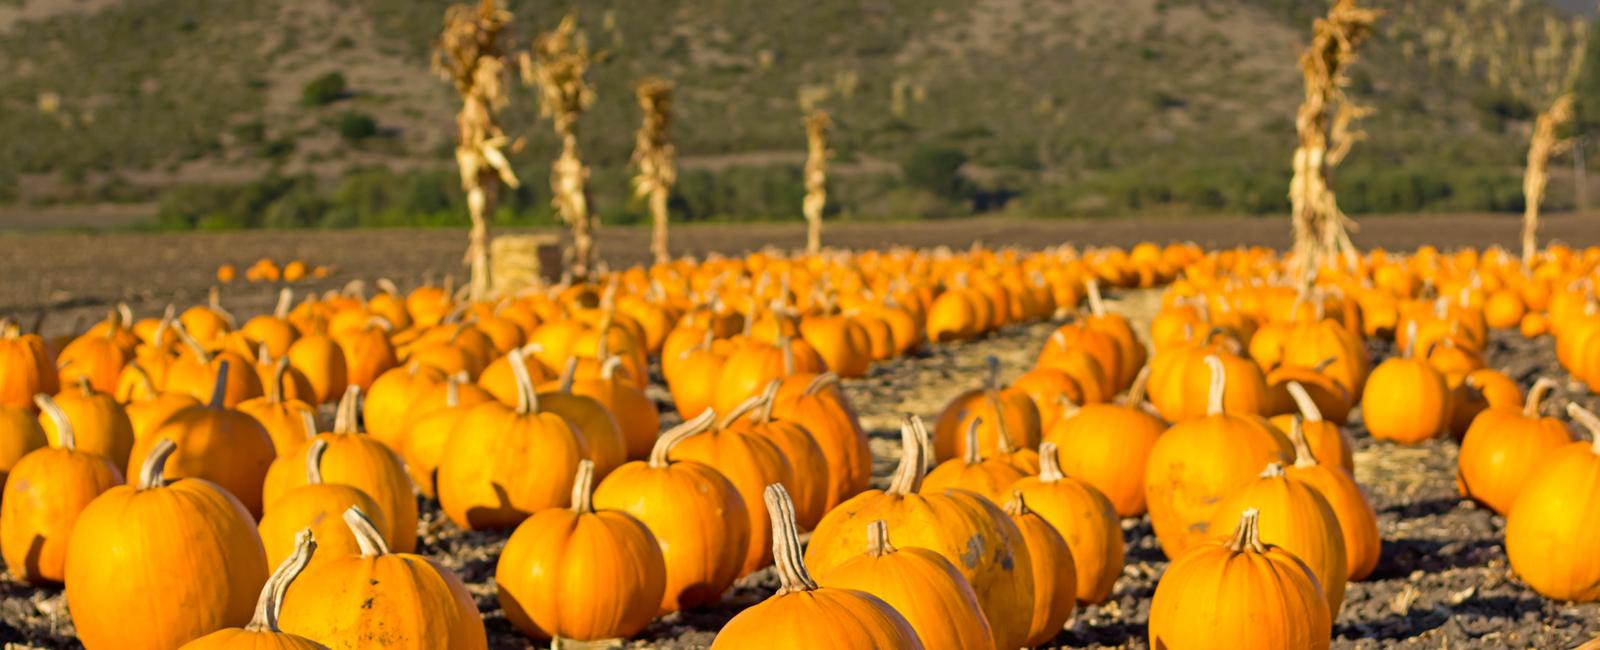 Illinois produces 5x more pumpkins than any other state